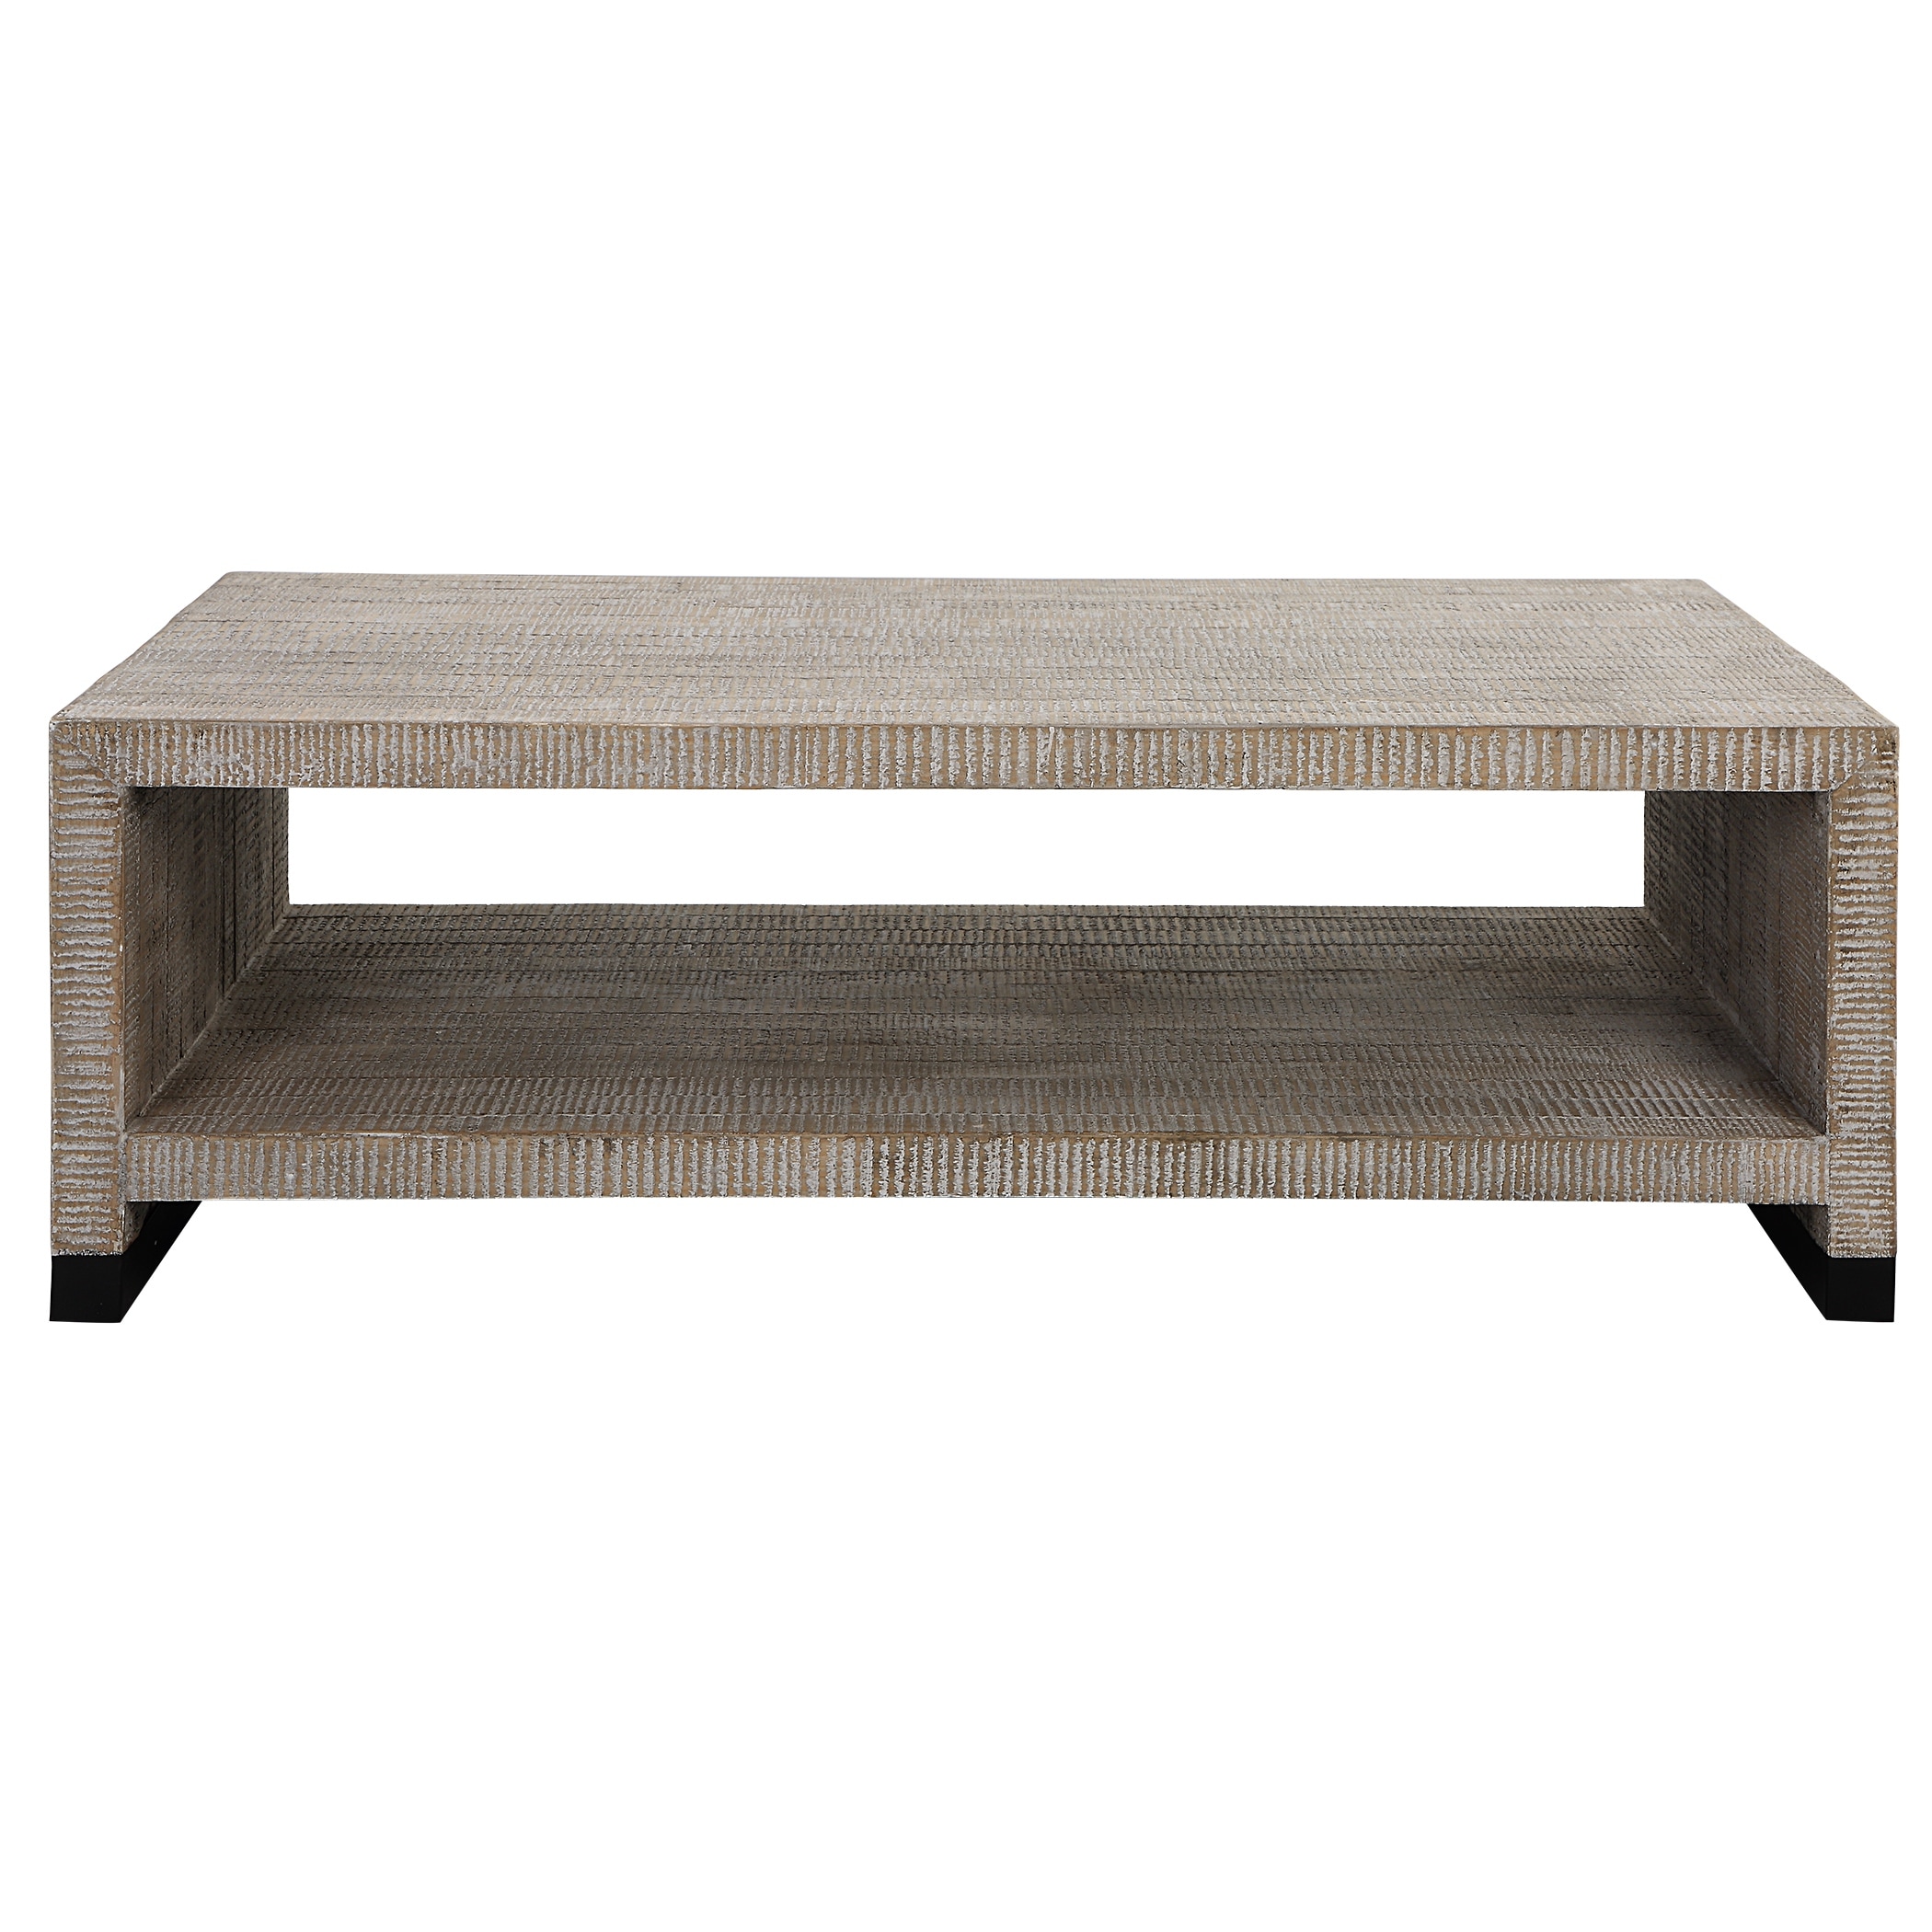 Uttermost Bosk White Washed Coffee Table - 54 inchW x 18 inchH x 30 inchD